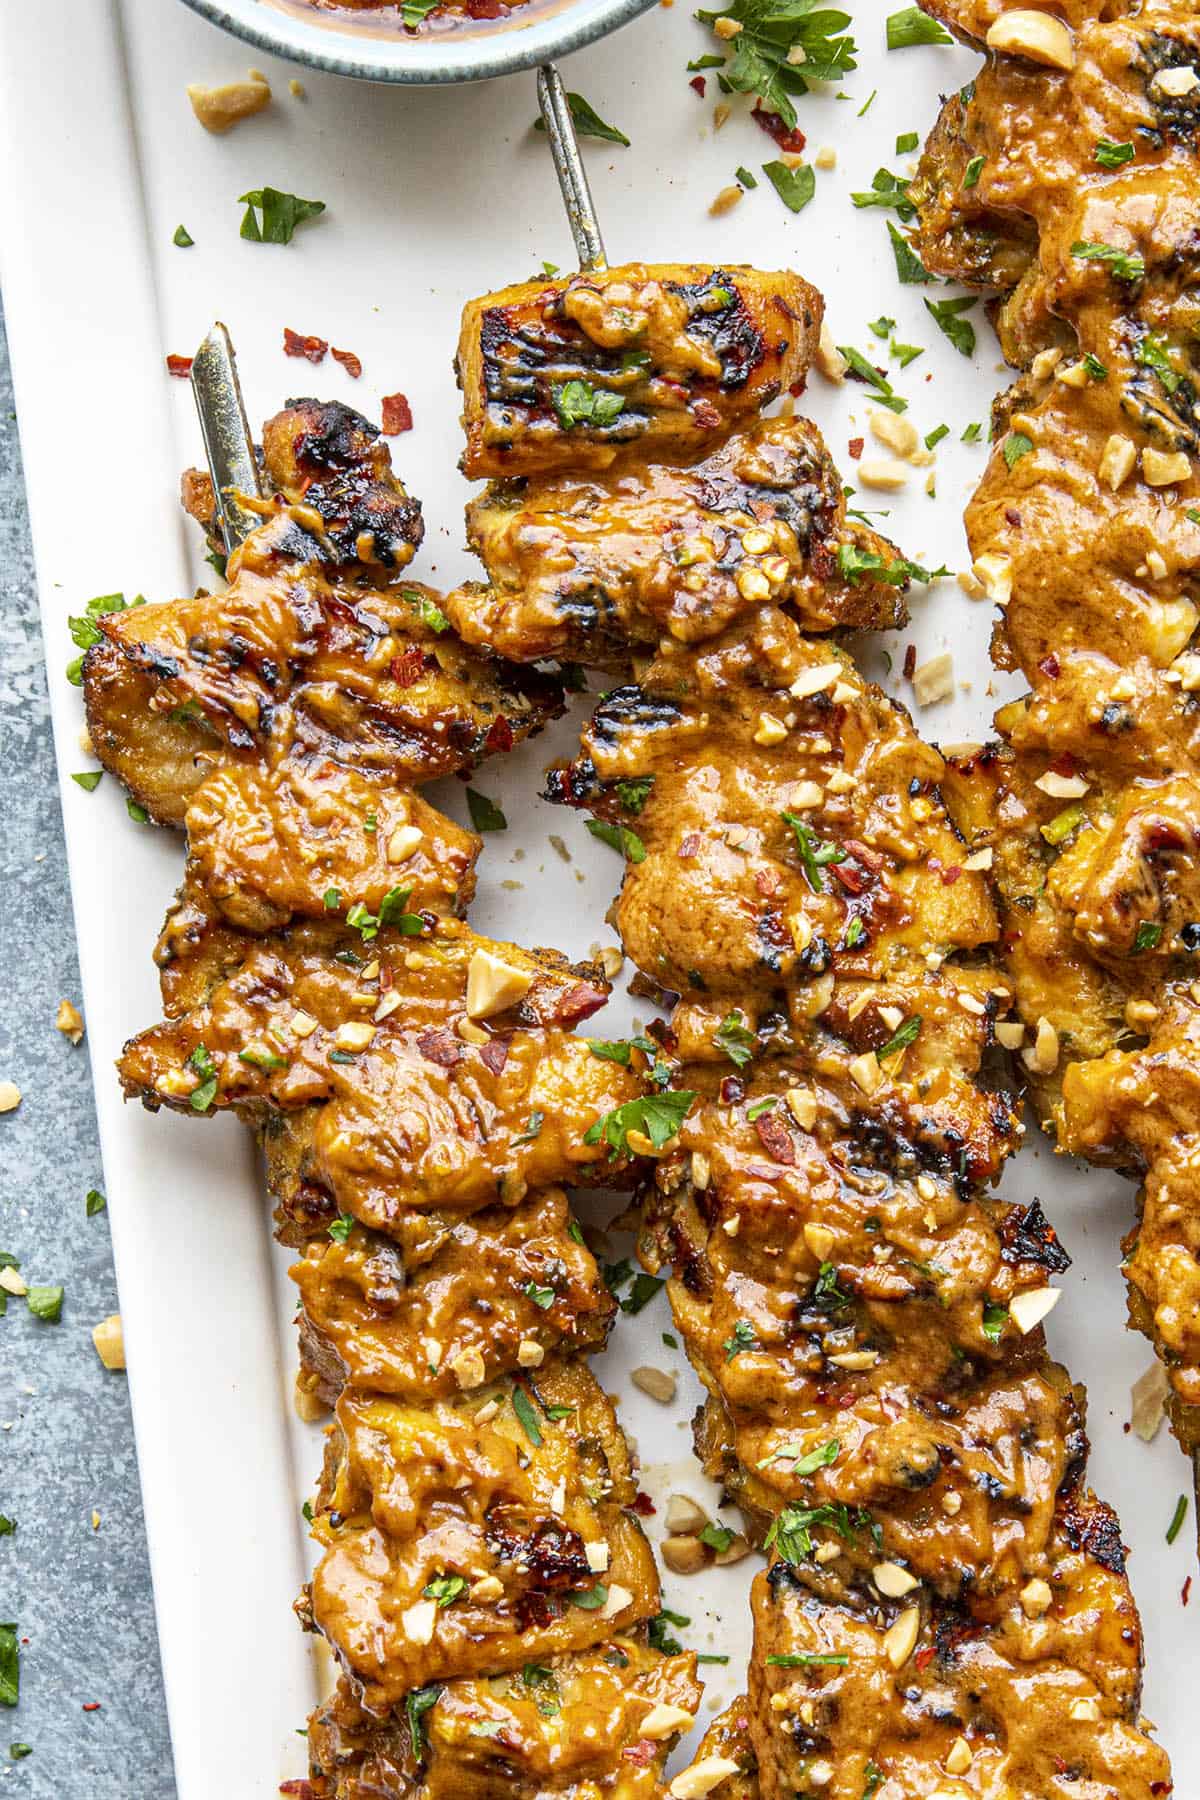 Thai Chicken Satay skewers on a plate